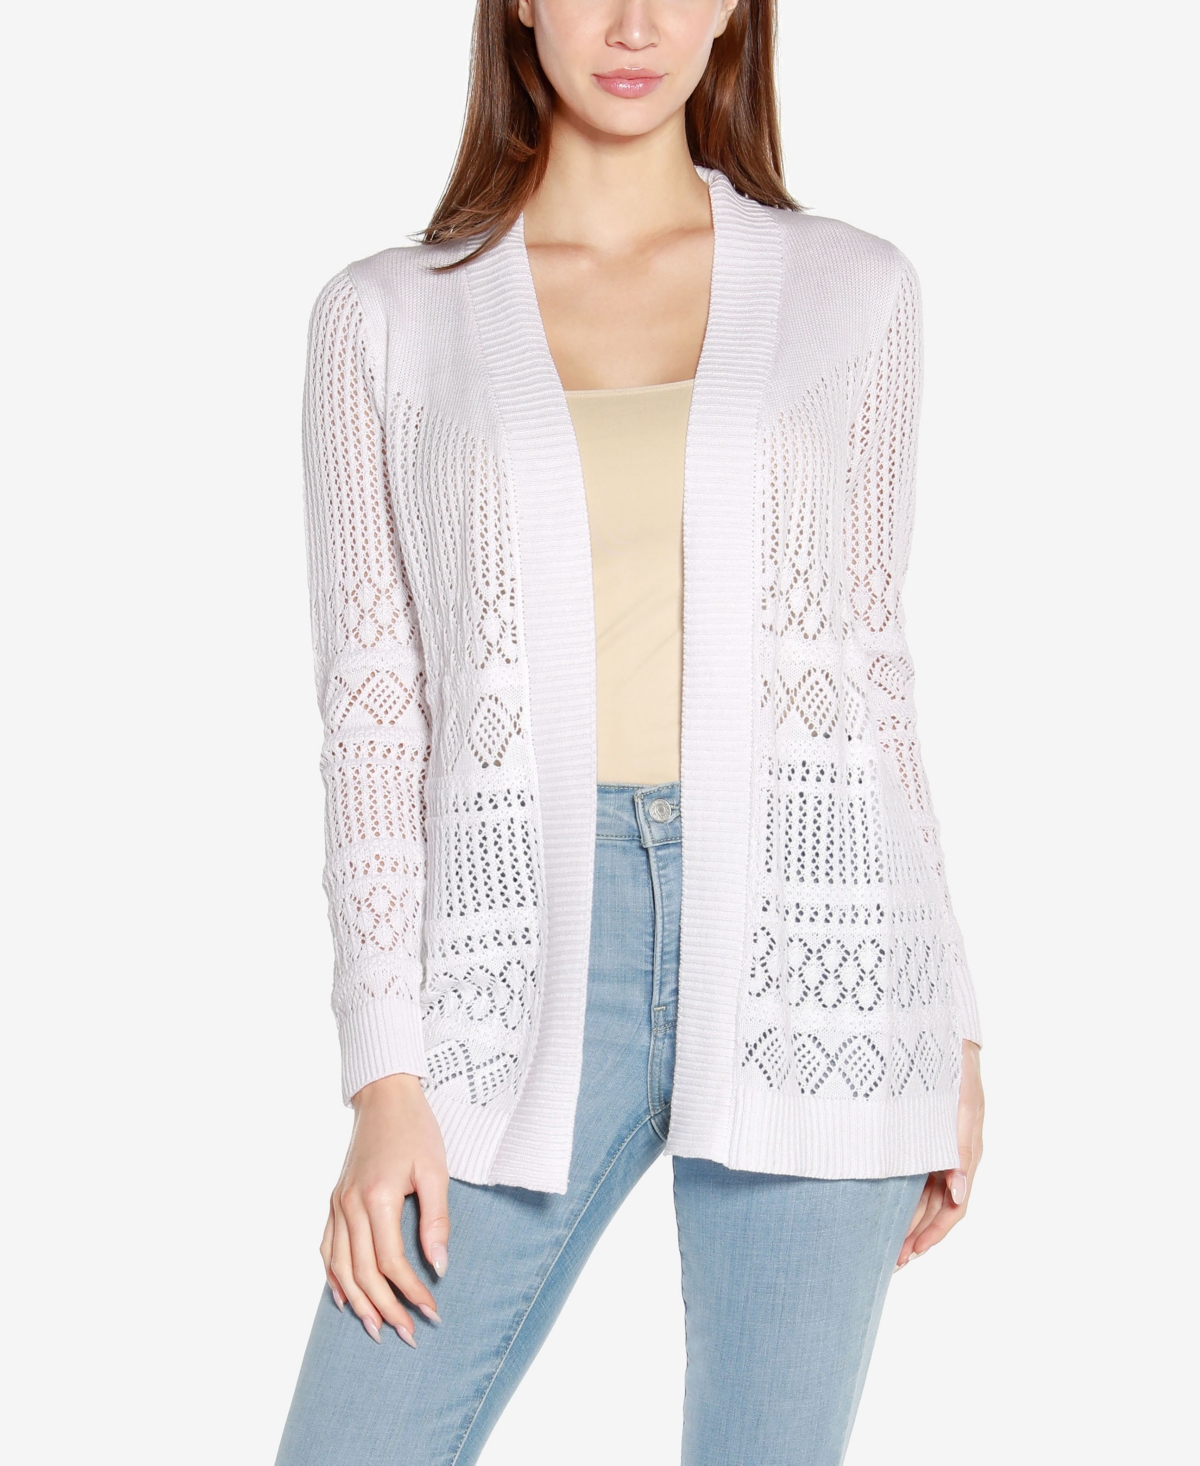 Belldini Plus Size Pointelle Long Sleeves Open Cardigan Sweater In White